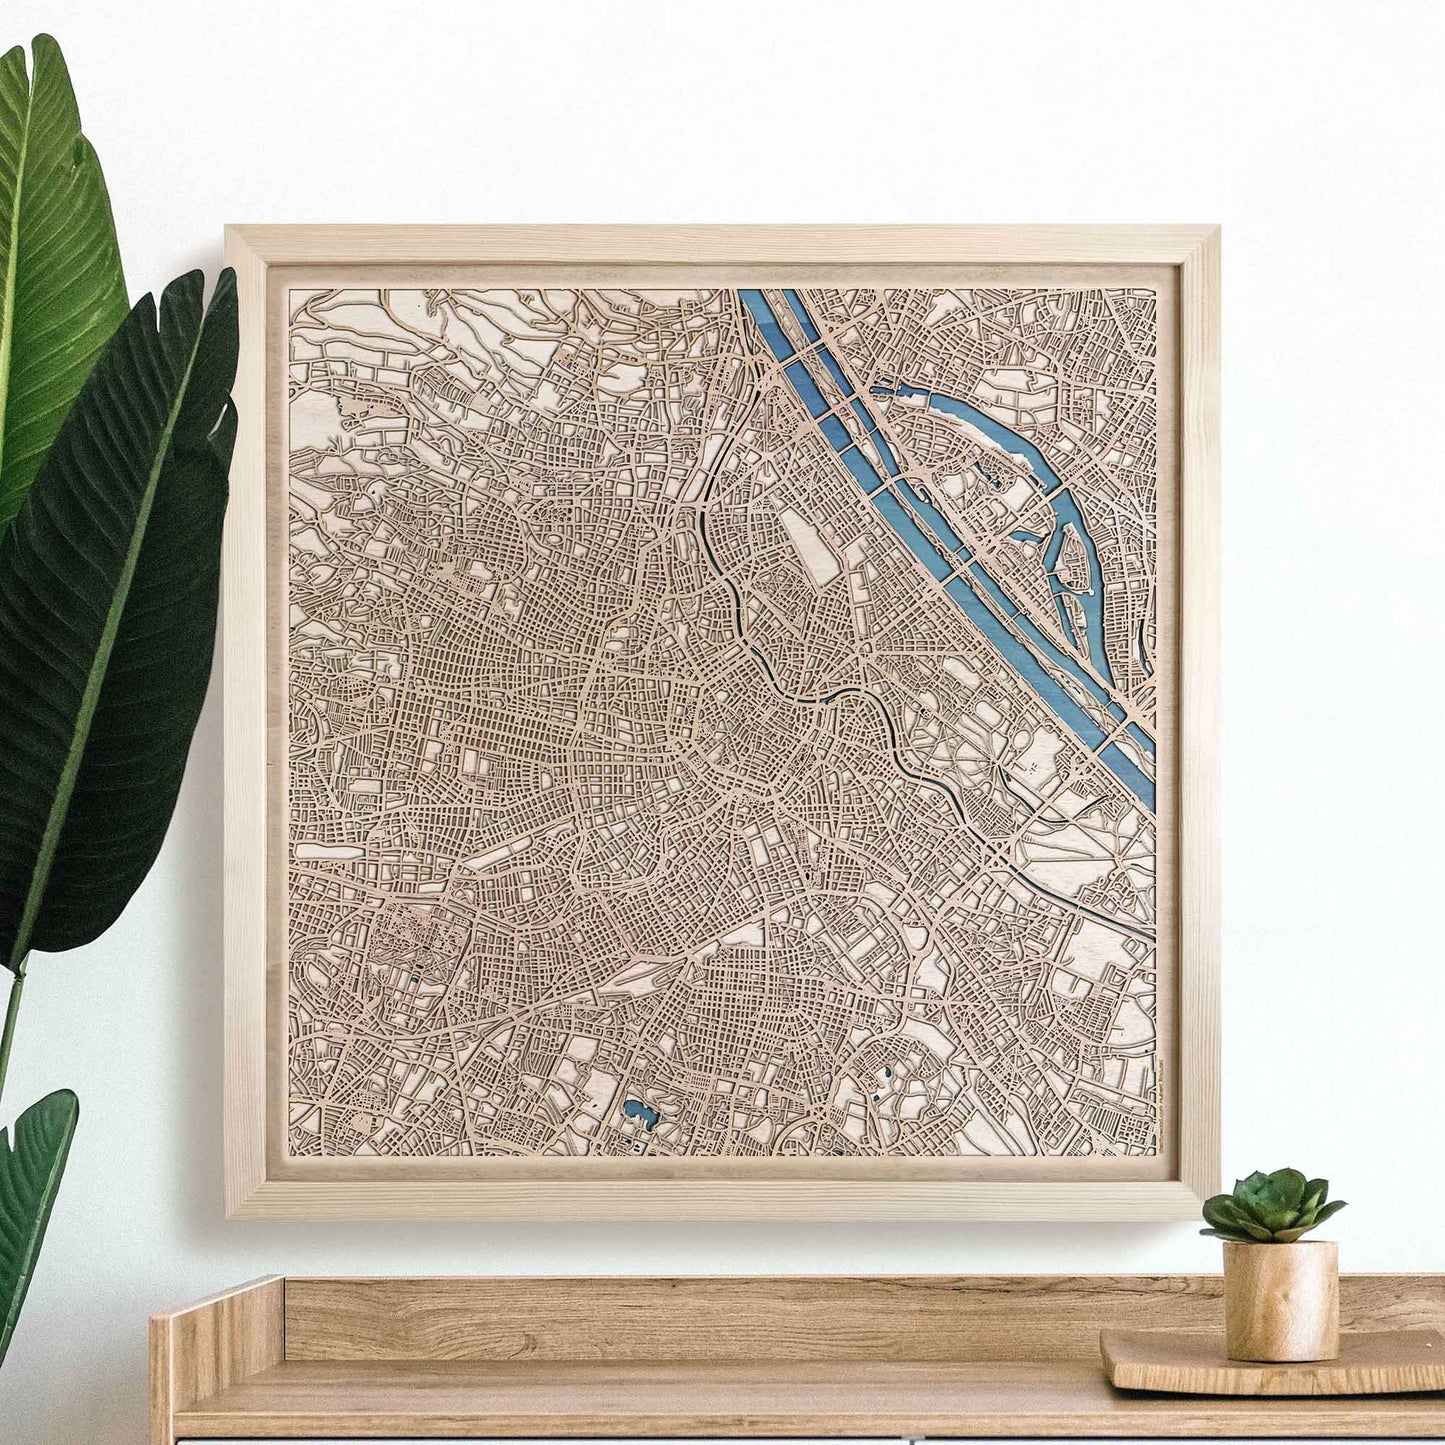 Vienna Wooden Map by CityWood - Custom Wood Map Art - Unique Laser Cut Engraved - Anniversary Gift